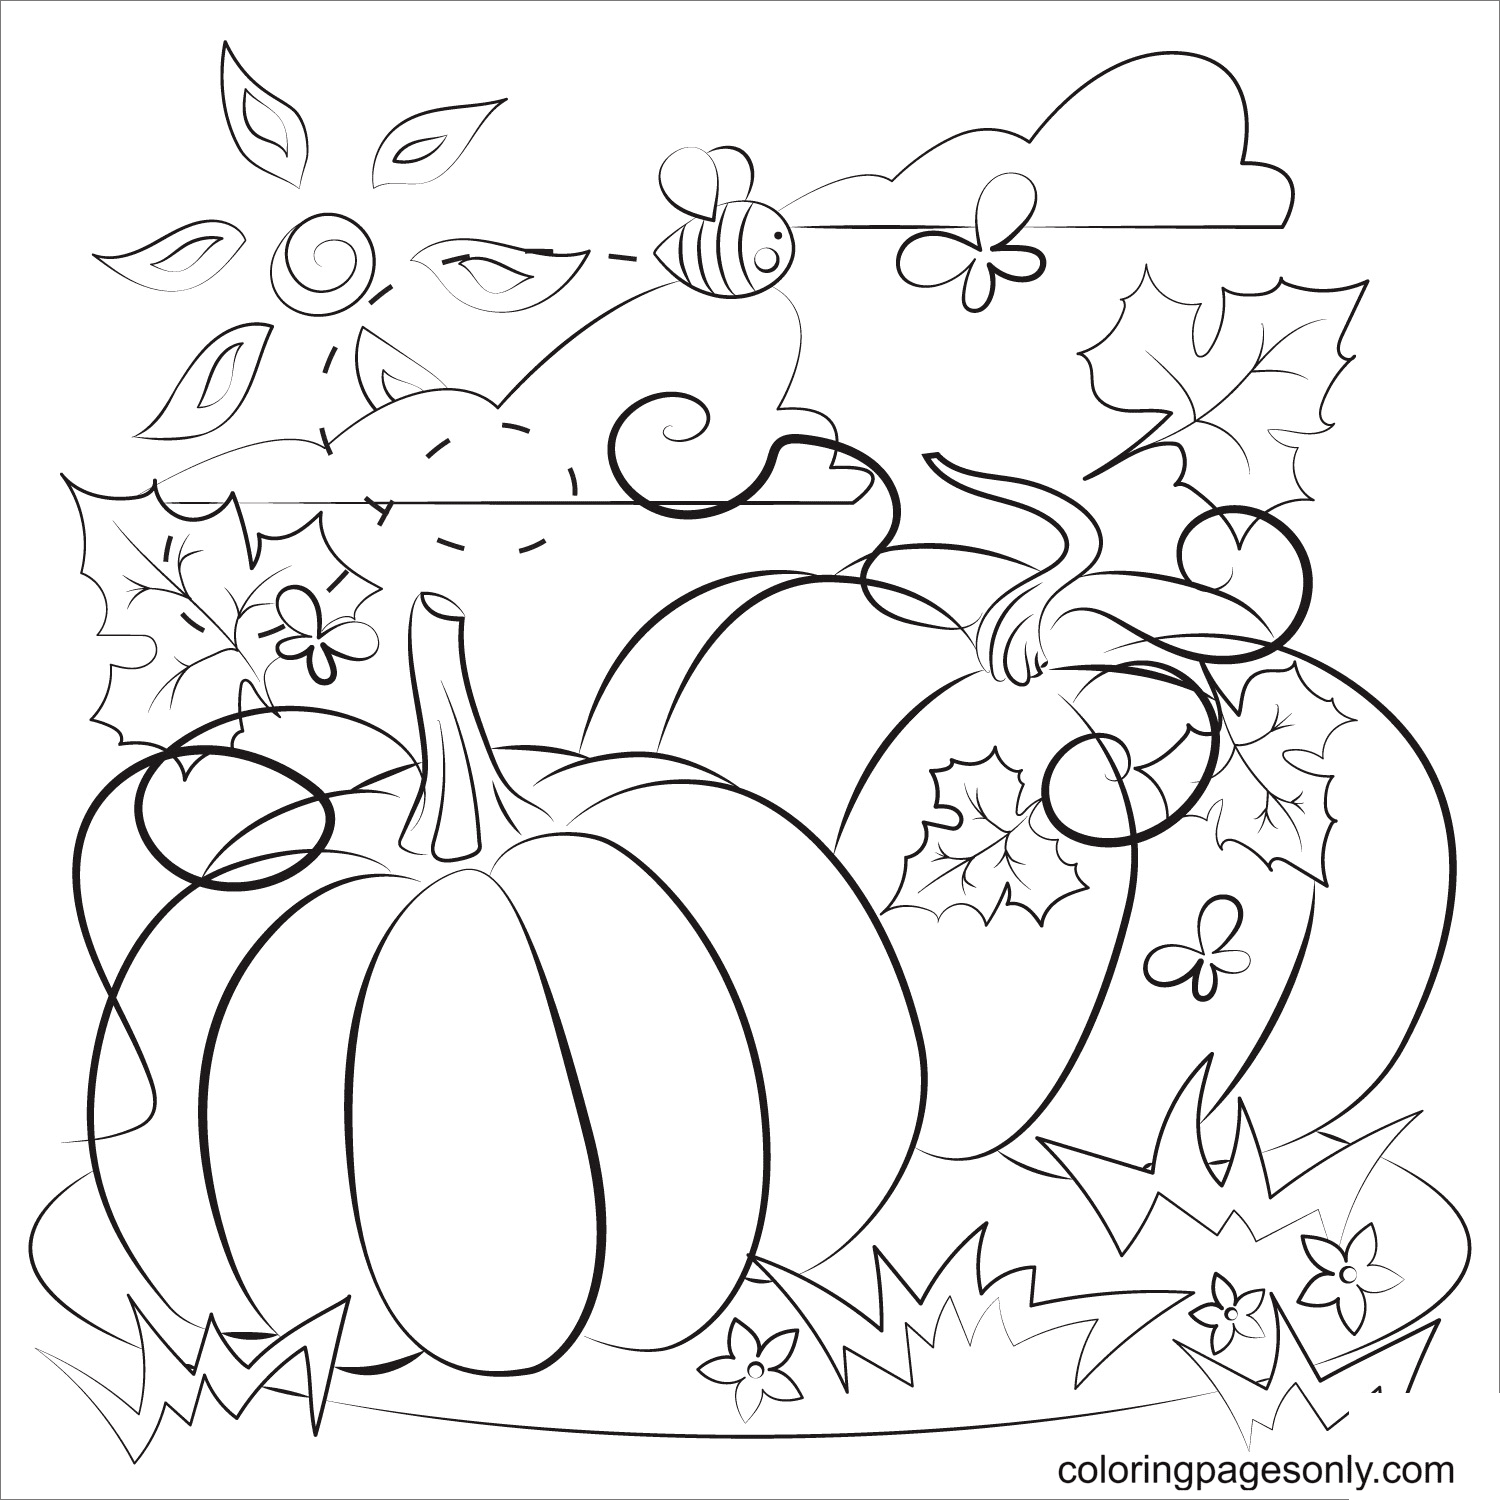 32 Thanksgiving Coloring Pages For Kids And Adults - Our Mindful Life   Fall coloring pages, Thanksgiving coloring pages, Pumpkin coloring pages